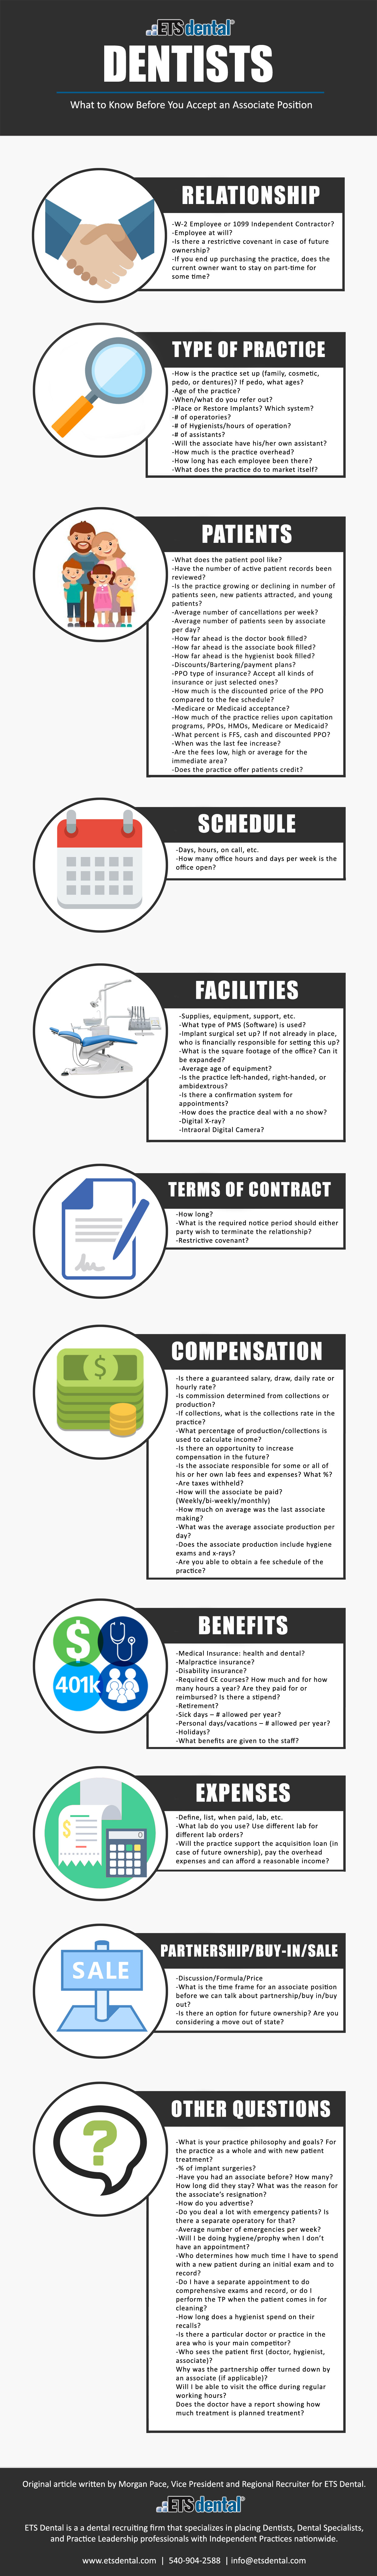 Infographic: Dentists - What to Know Before You Accept an Associate Position